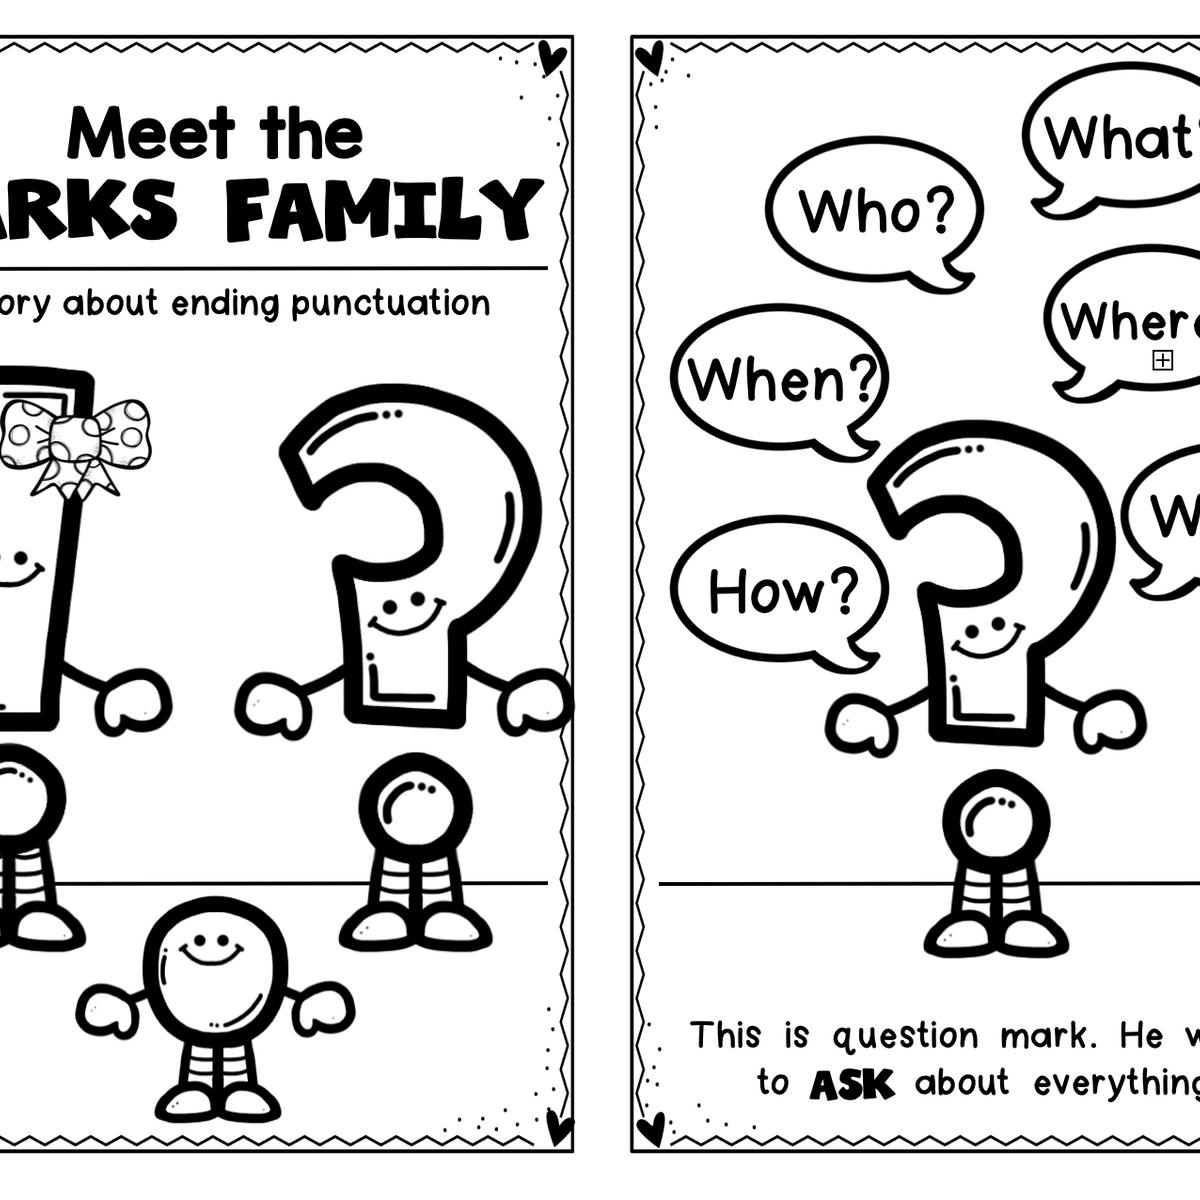 Punctuation Activities for Kindergarten & First: The Marks Family